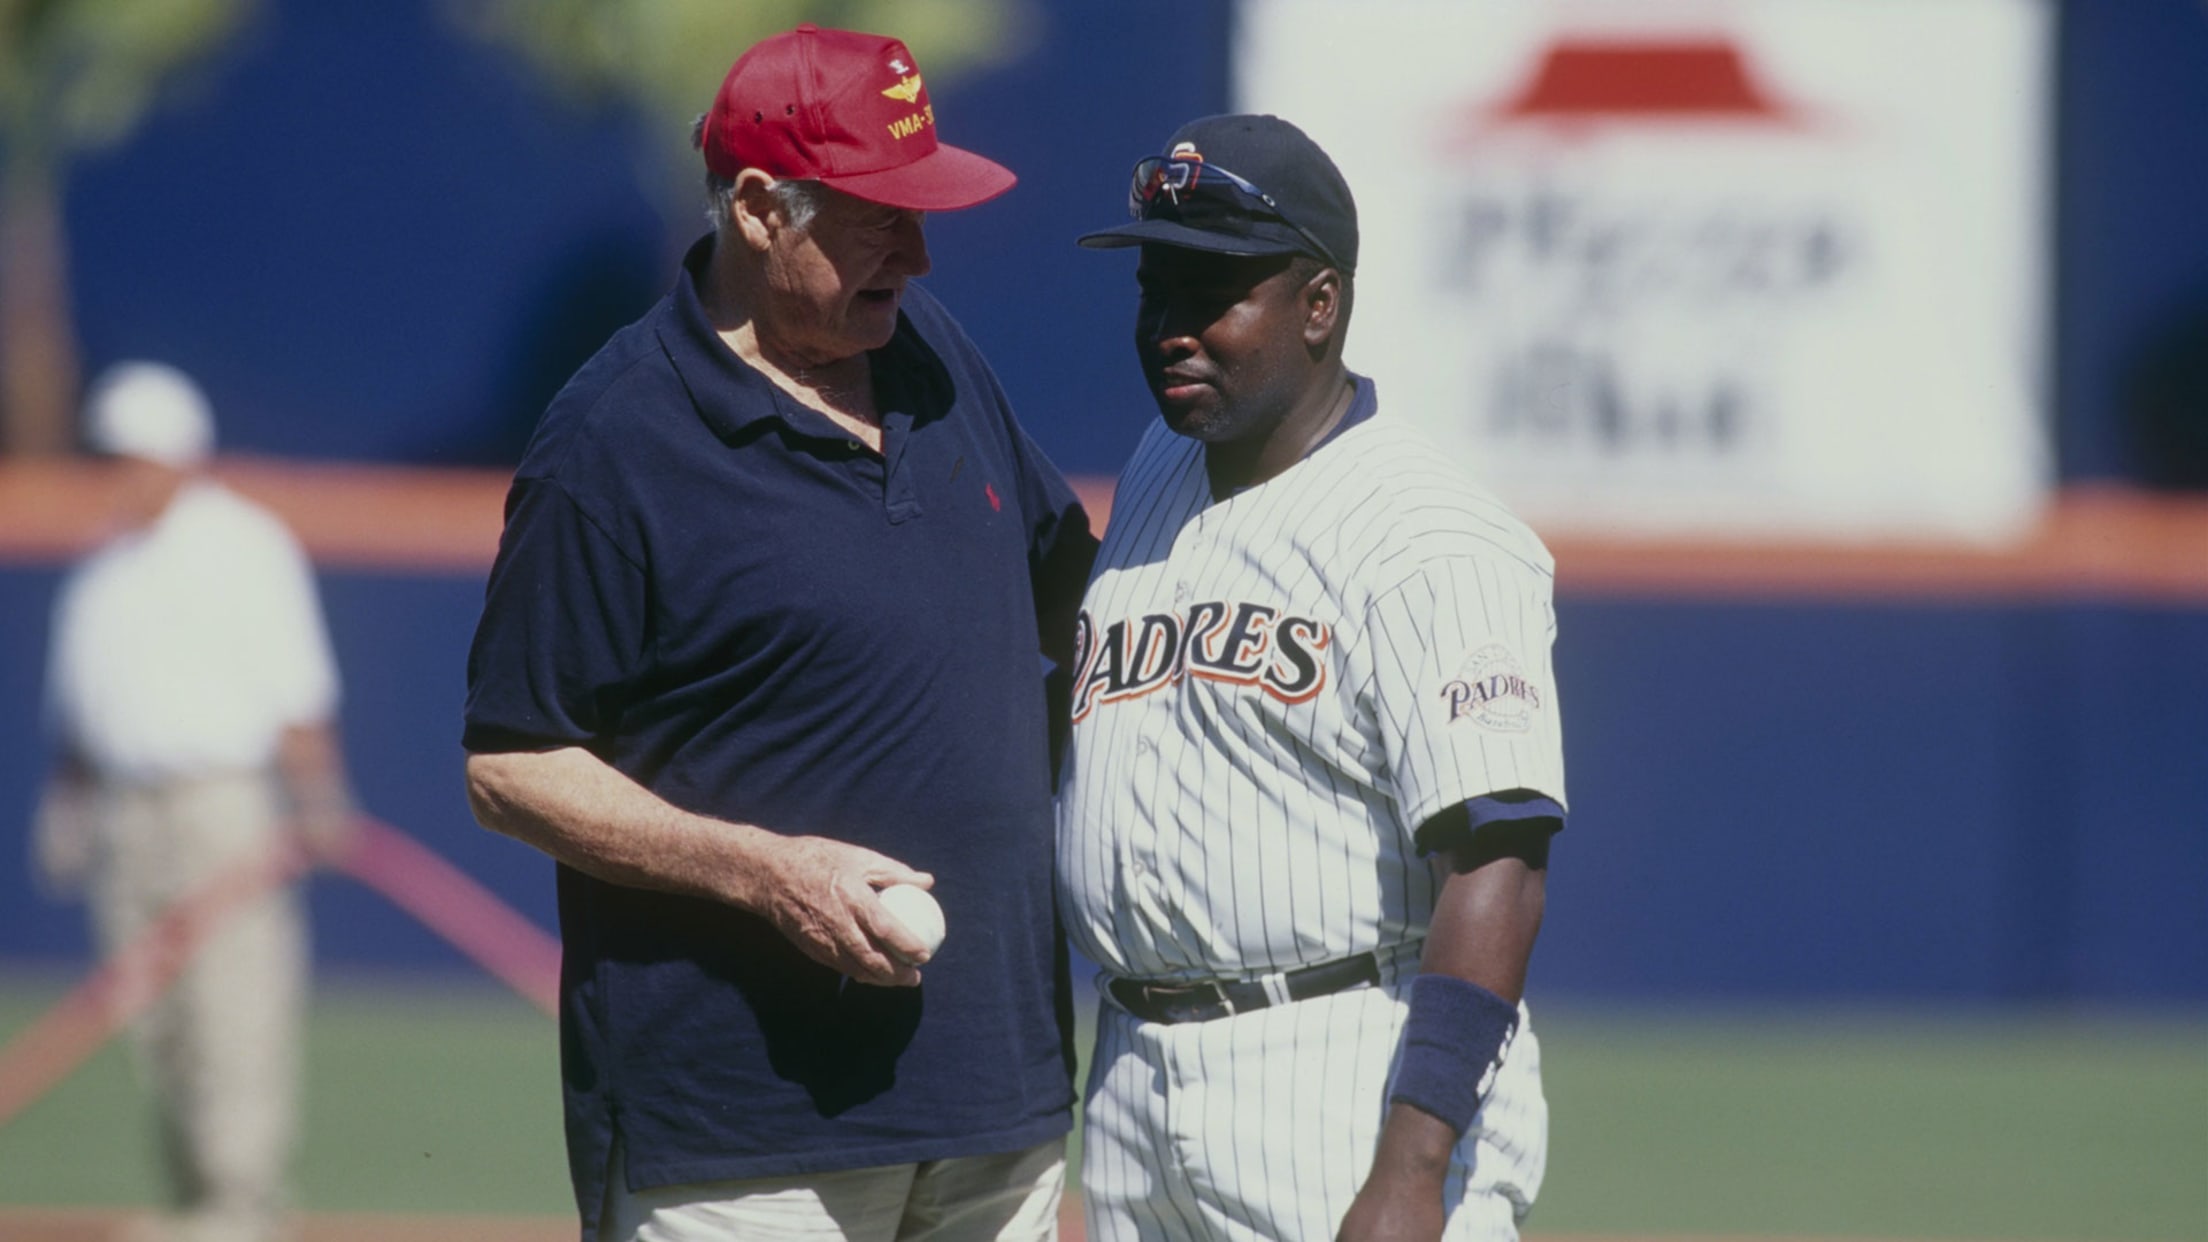 Tony Gwynn Jr. calls Padres game on anniversary of father's death